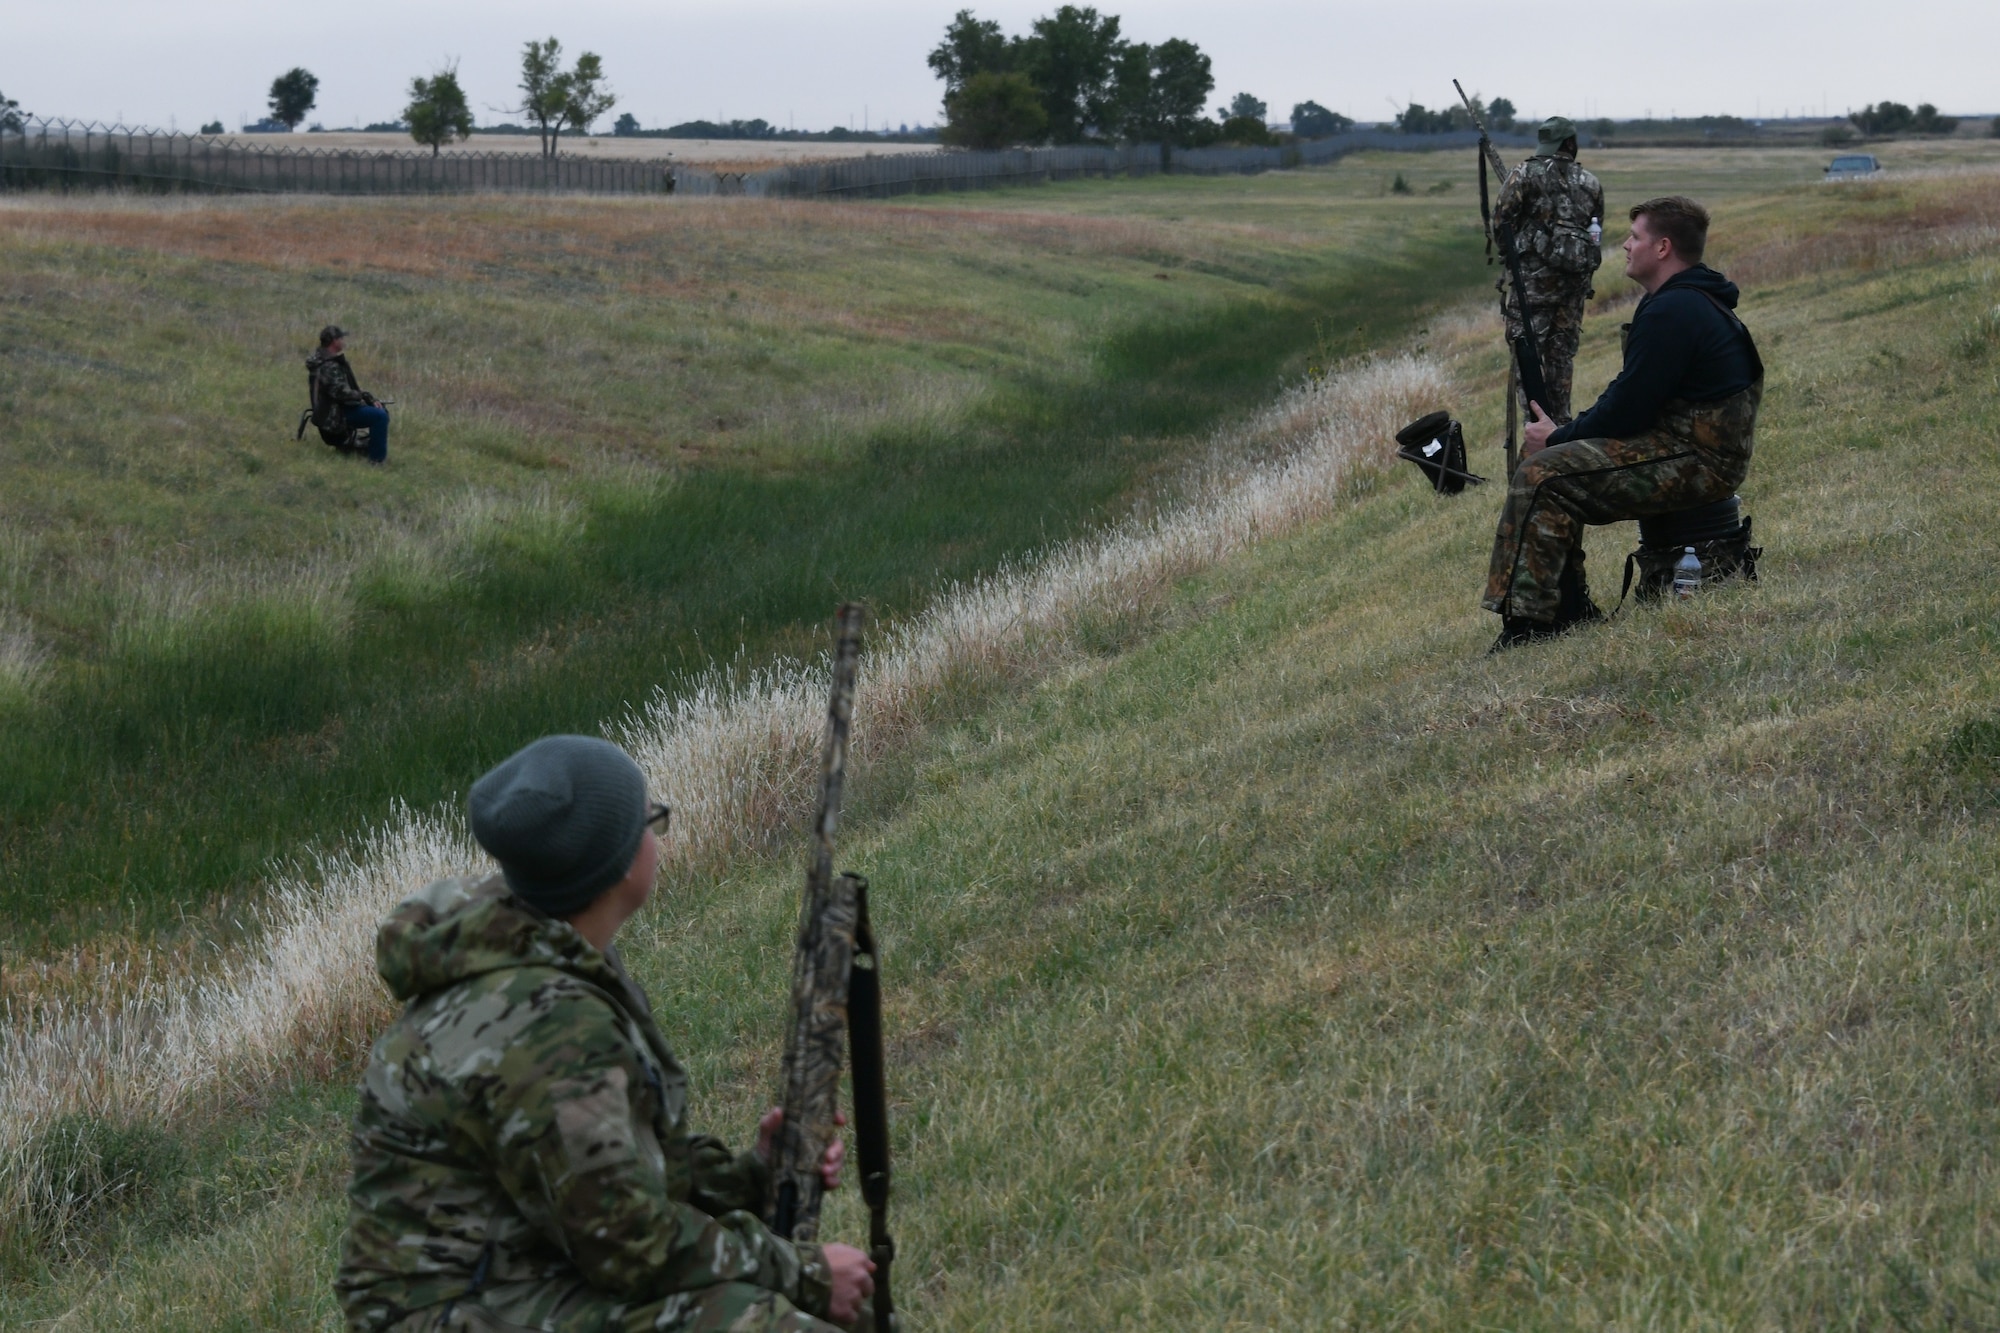 Airmen and families from the 97th Air Mobility Wing wait during a dove hunt at Altus Air Force Base, Oklahoma, Oct. 8, 2022. The dove hunt provides an opportunity for members of the community to gather and help prevent overpopulation of local fowl. (U.S. Air Force photo by Airman 1st Class Miyah Gray)